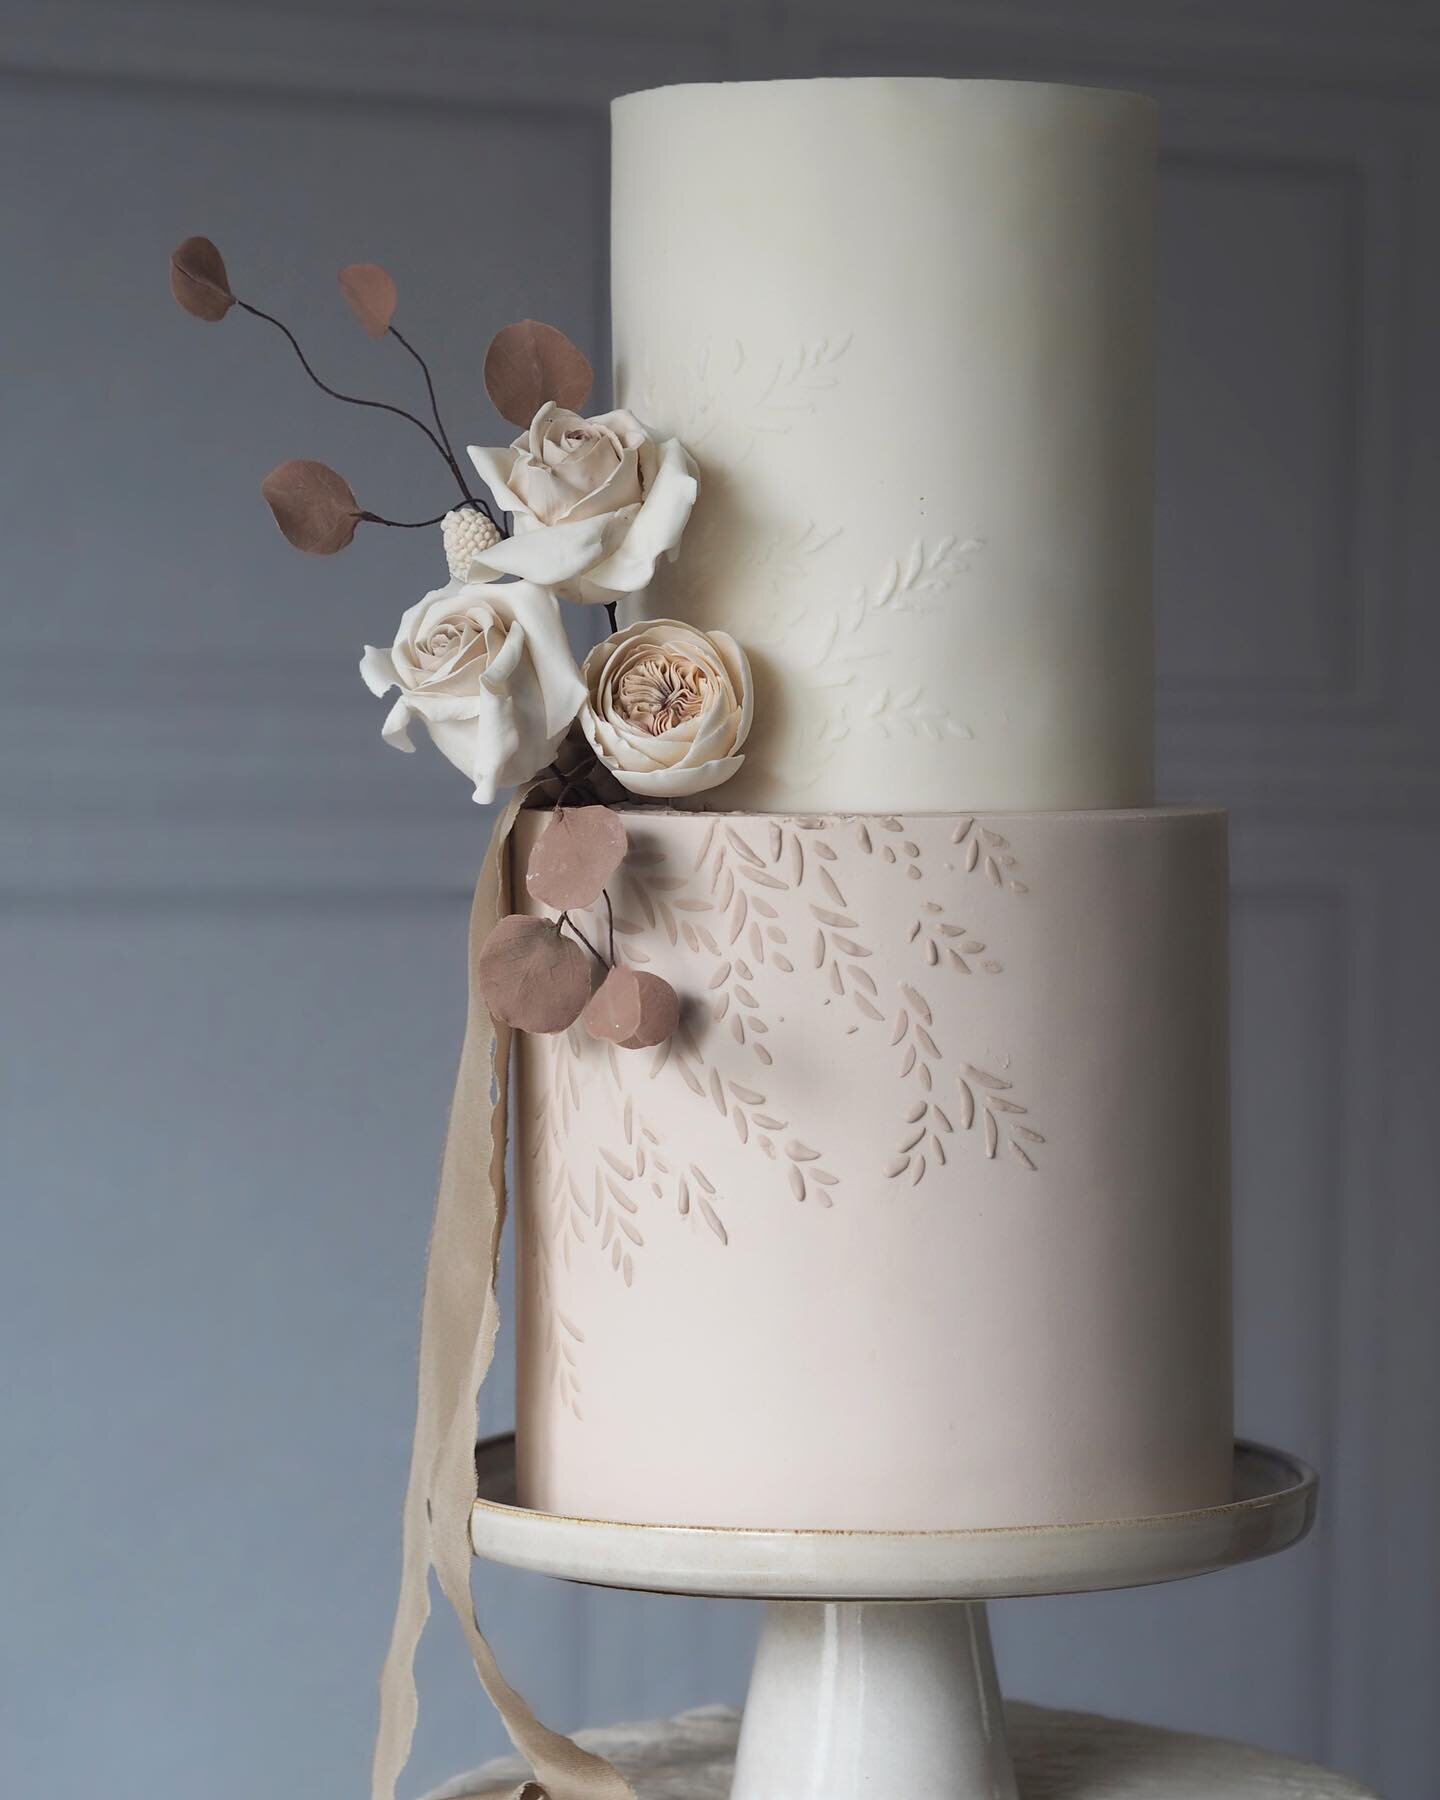 Happiest of wedding days Margot and Rory!  Can&rsquo;t get enough of your wedding mood! 
.
Have the best day celebrating in the sunshine with your loved ones! 
.
#fondantcake #goldleaf #edibleart #flowercake #luxury #luxurycakes #londonweddings #suss